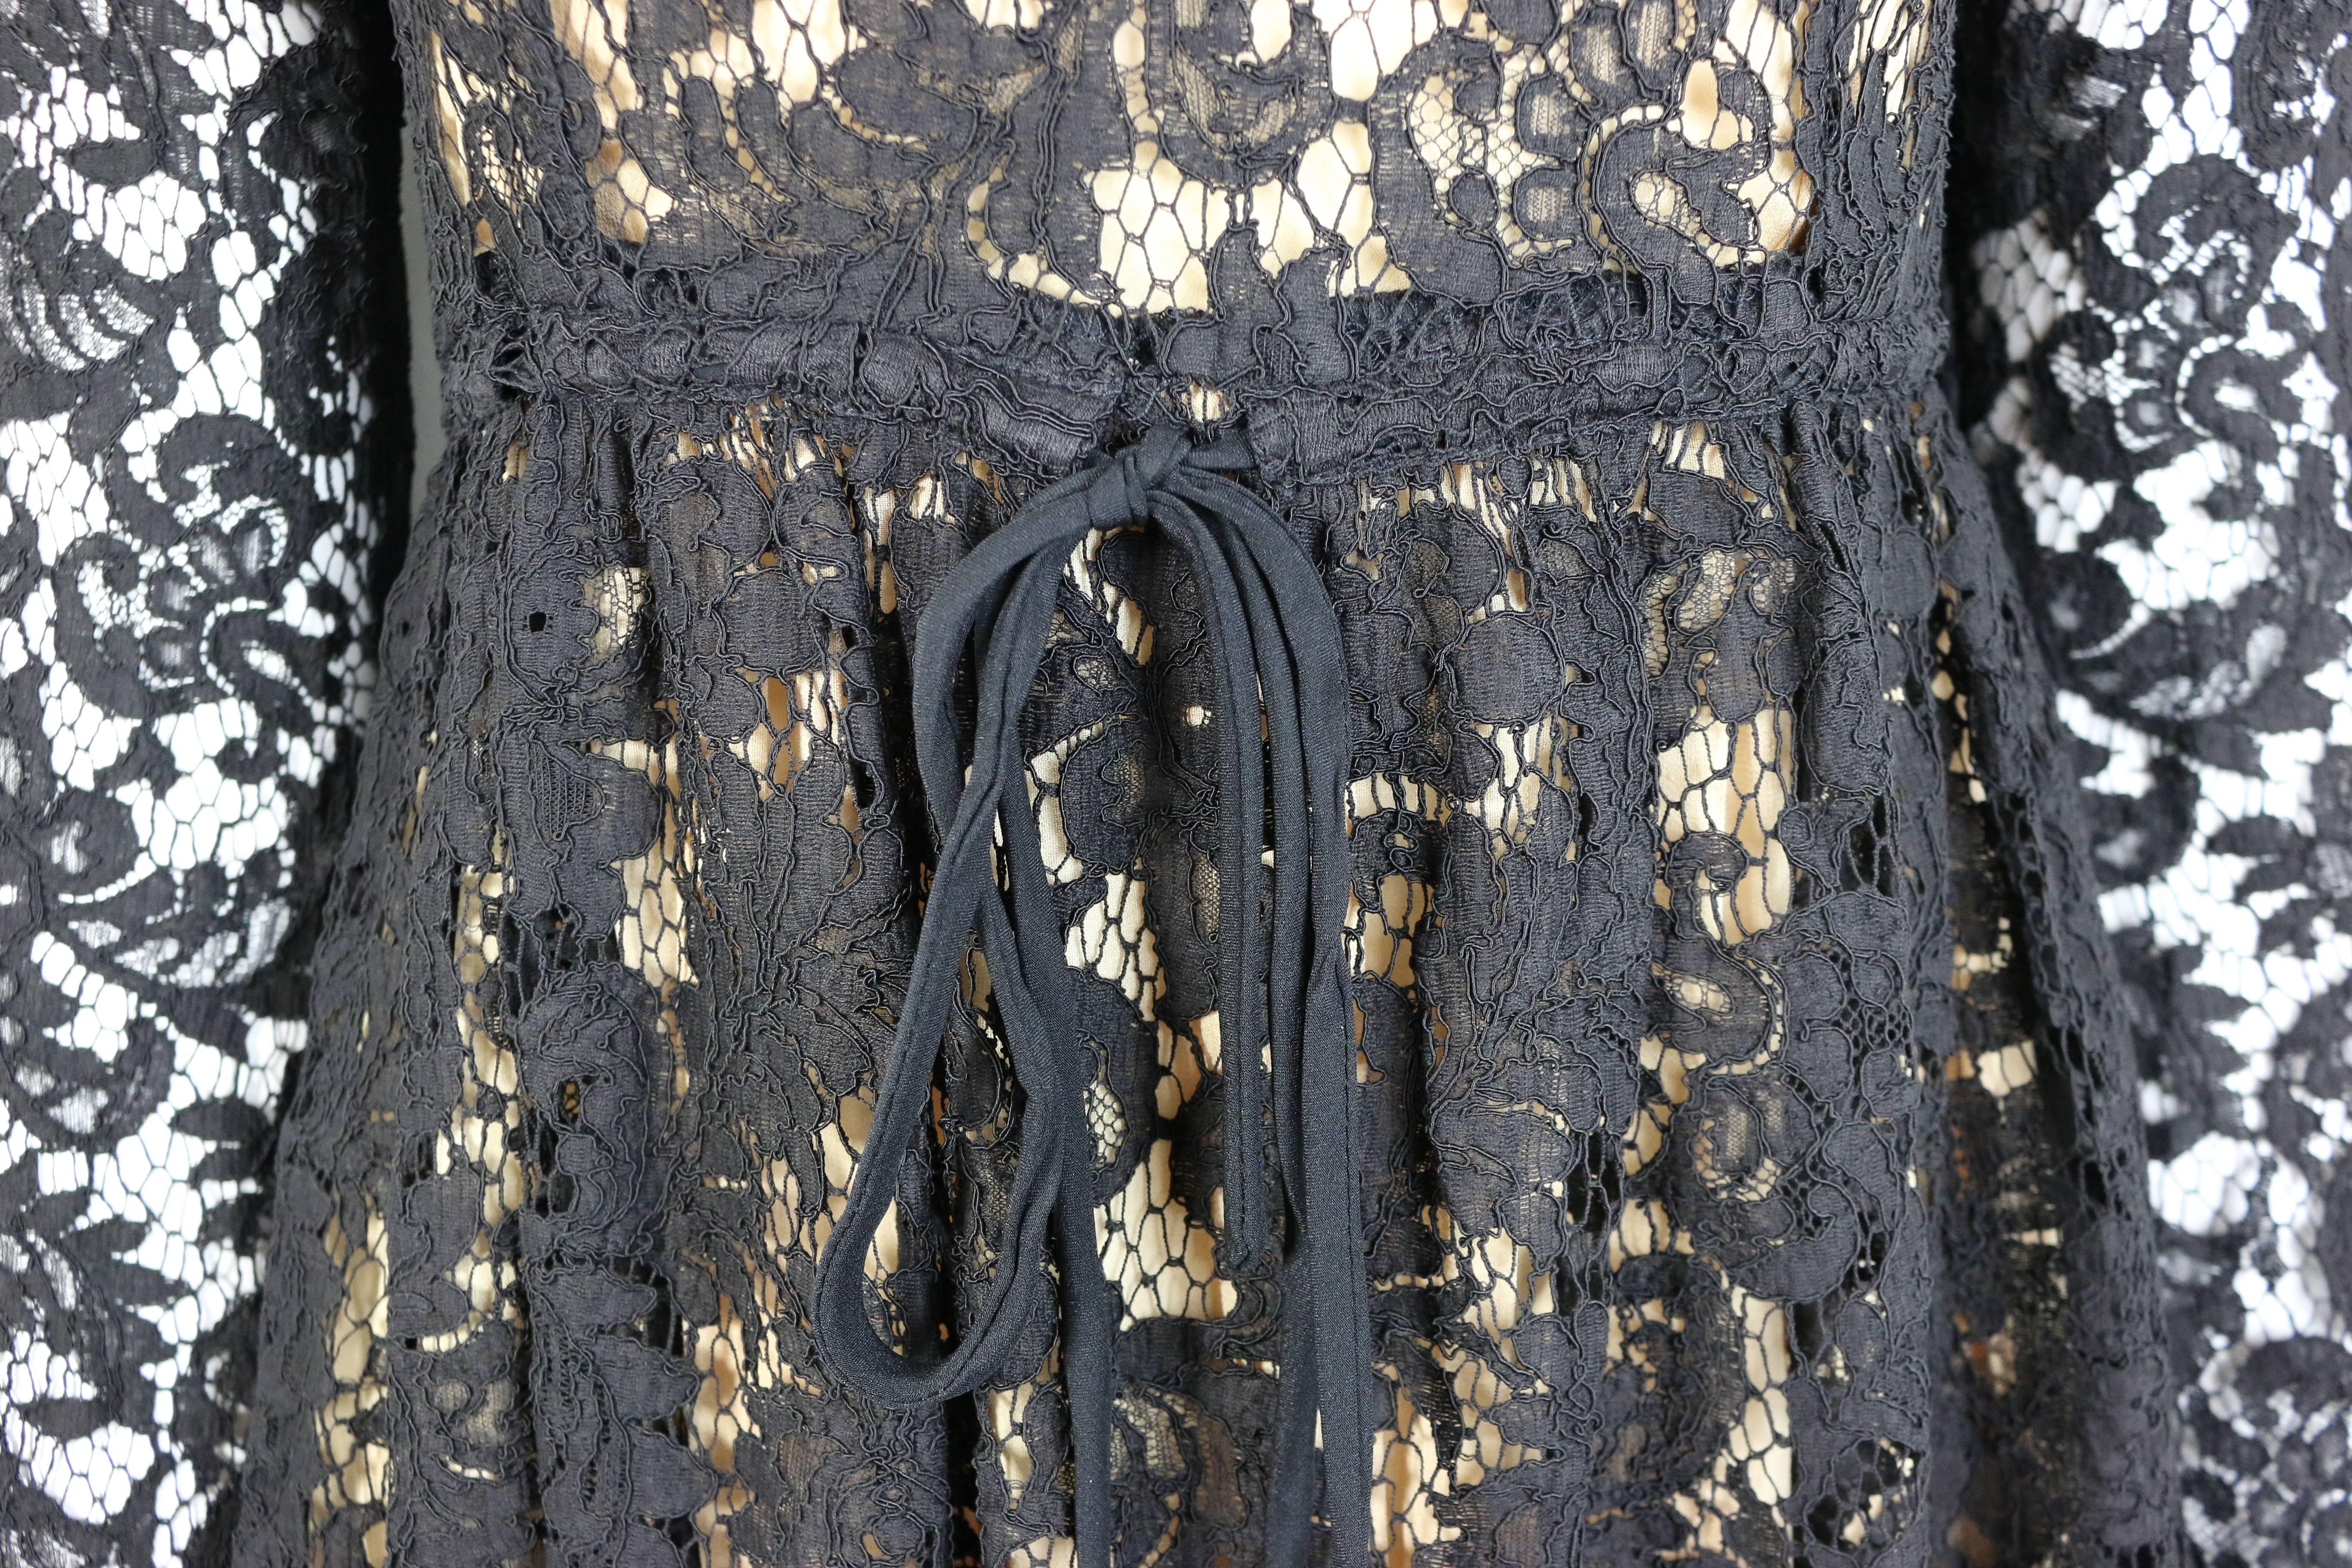 - Tom Ford for Gucci iconic famous lace dress from spring 1996 collection. 

- Size M. (It doesn't have size tag but it looks like a size M). 

- Height: 28in, Sleeve: 25in, Bust: 34in, Waist: 28in (measurement is approximate). 

- 70% Cotton, 20%